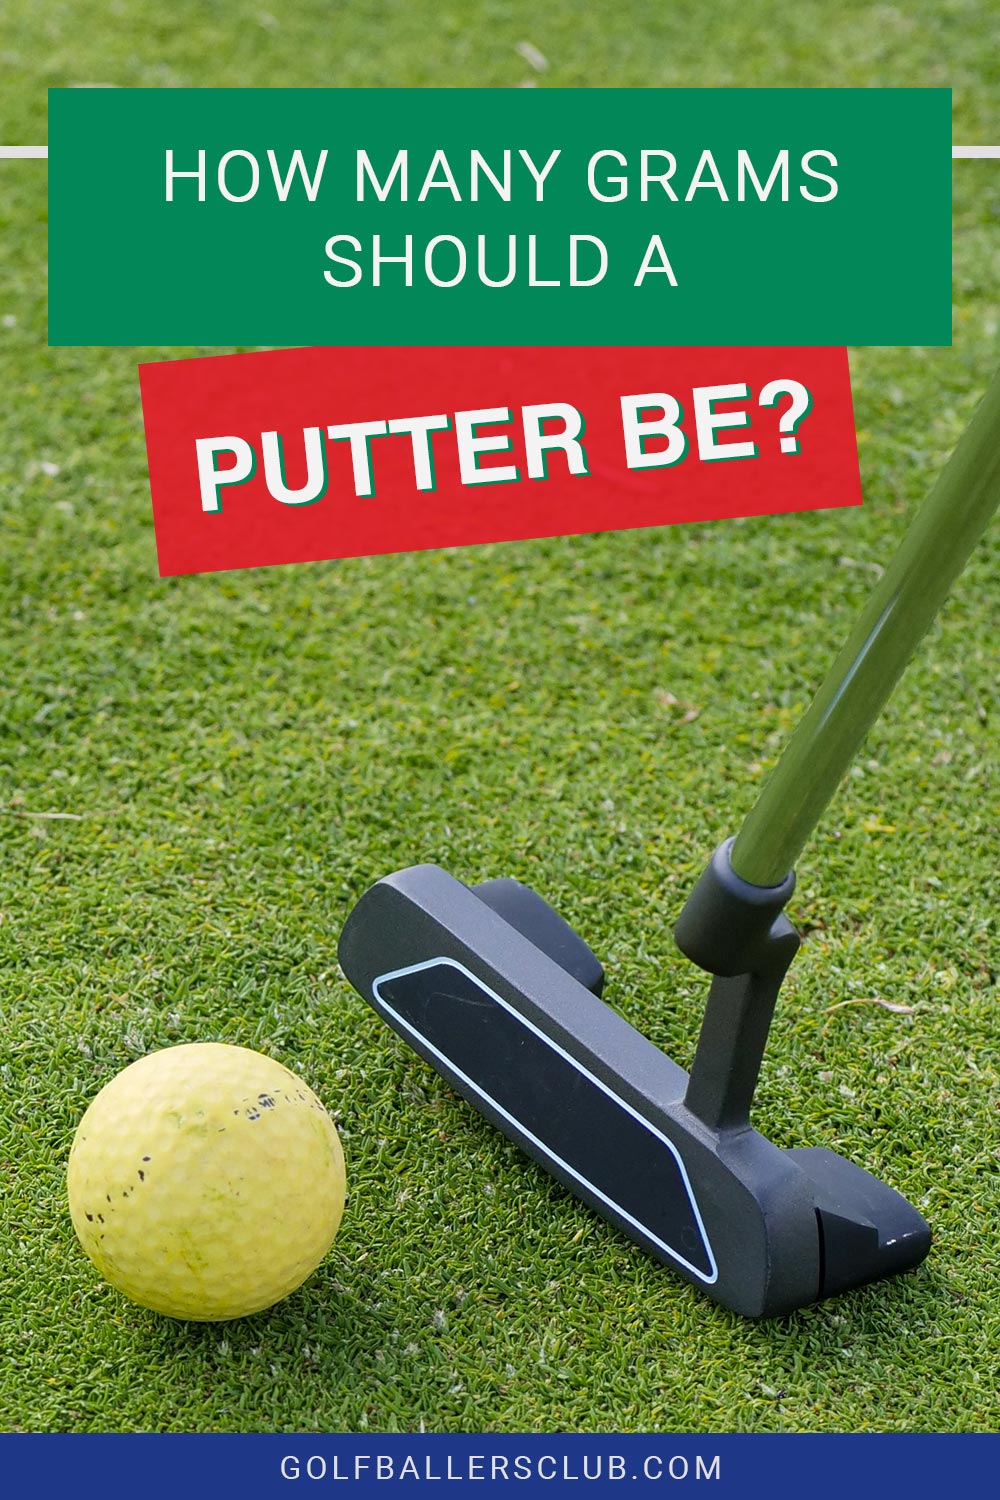 A putter and a golf ball on grass - How Many Grams Should A Putter Be?